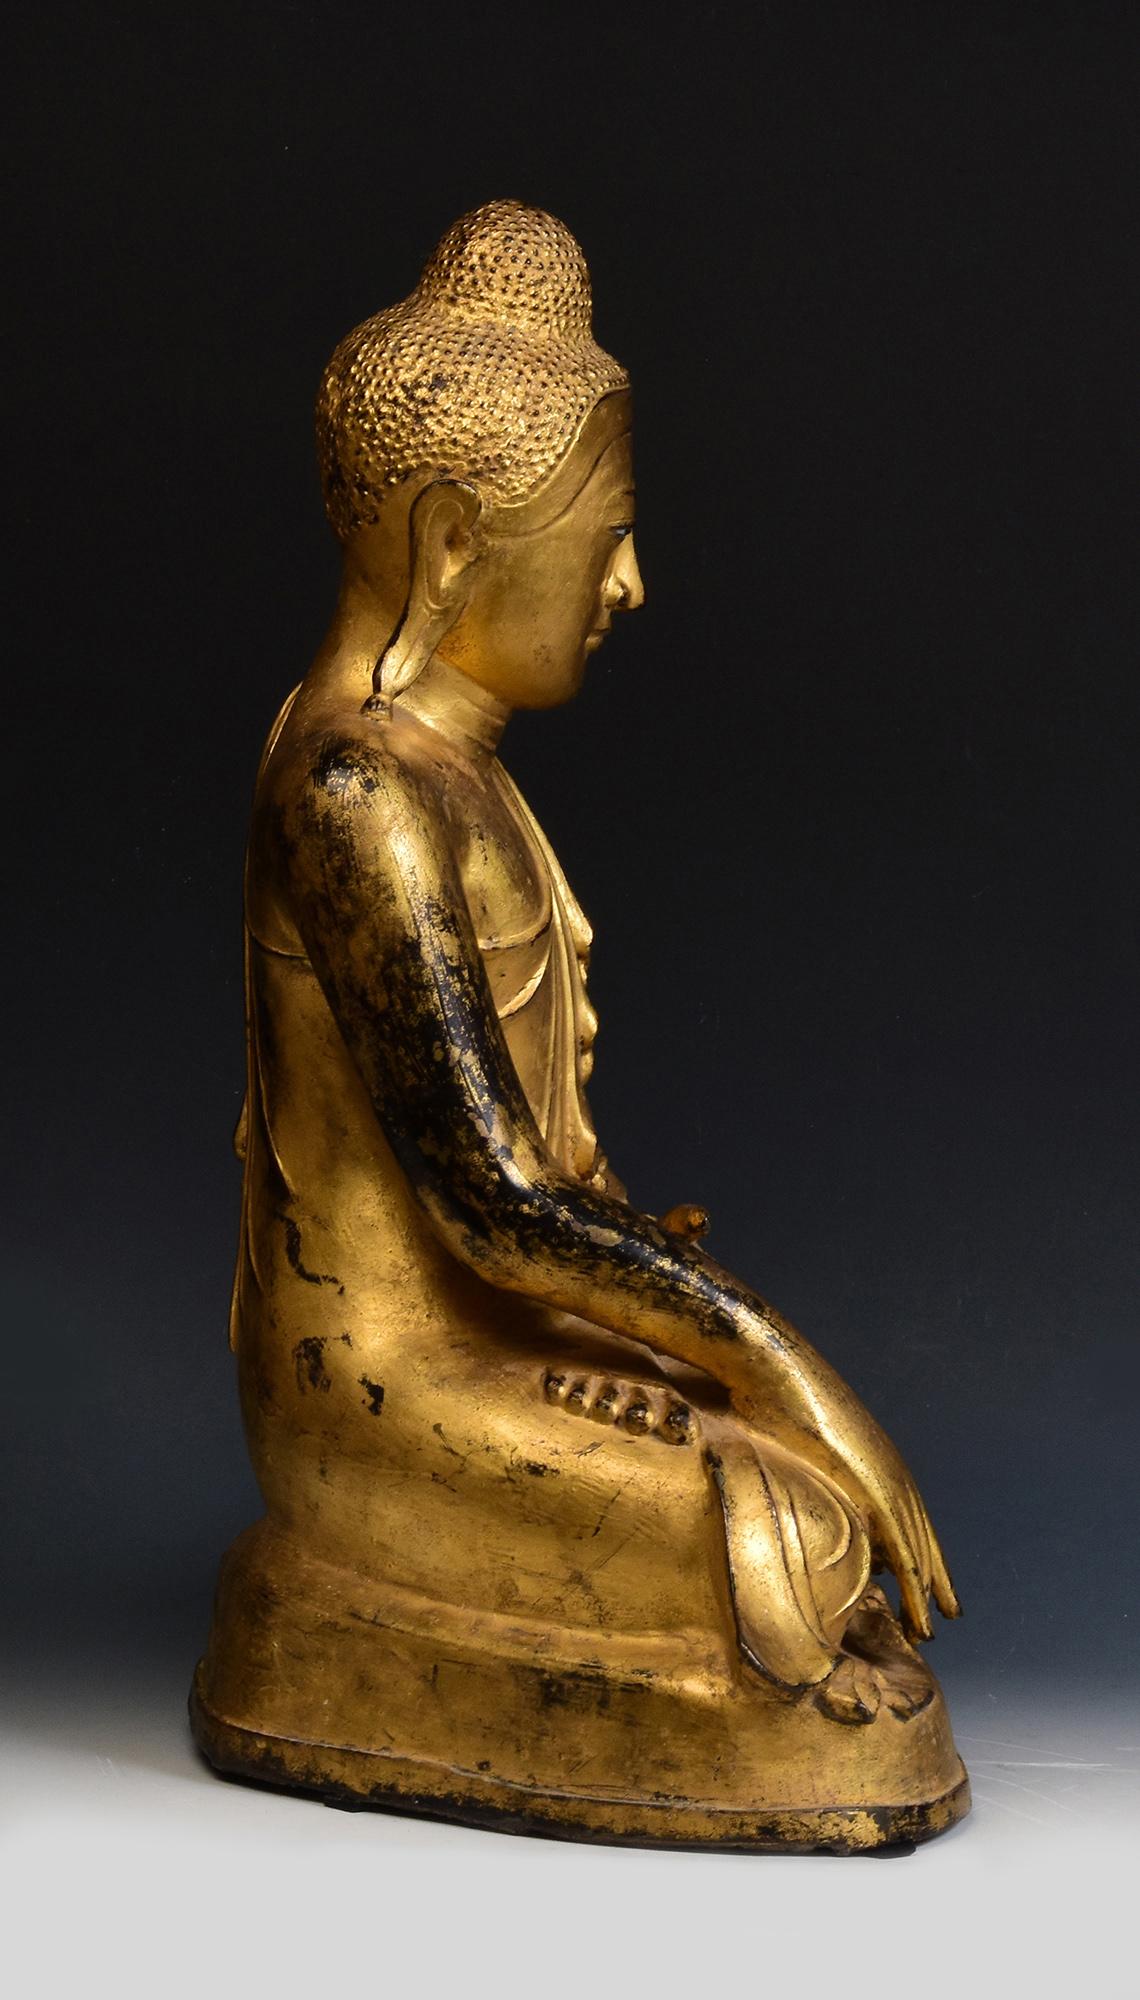 19th Century, Mandalay, Antique Burmese Bronze Seated Buddha with Gilded Gold For Sale 7